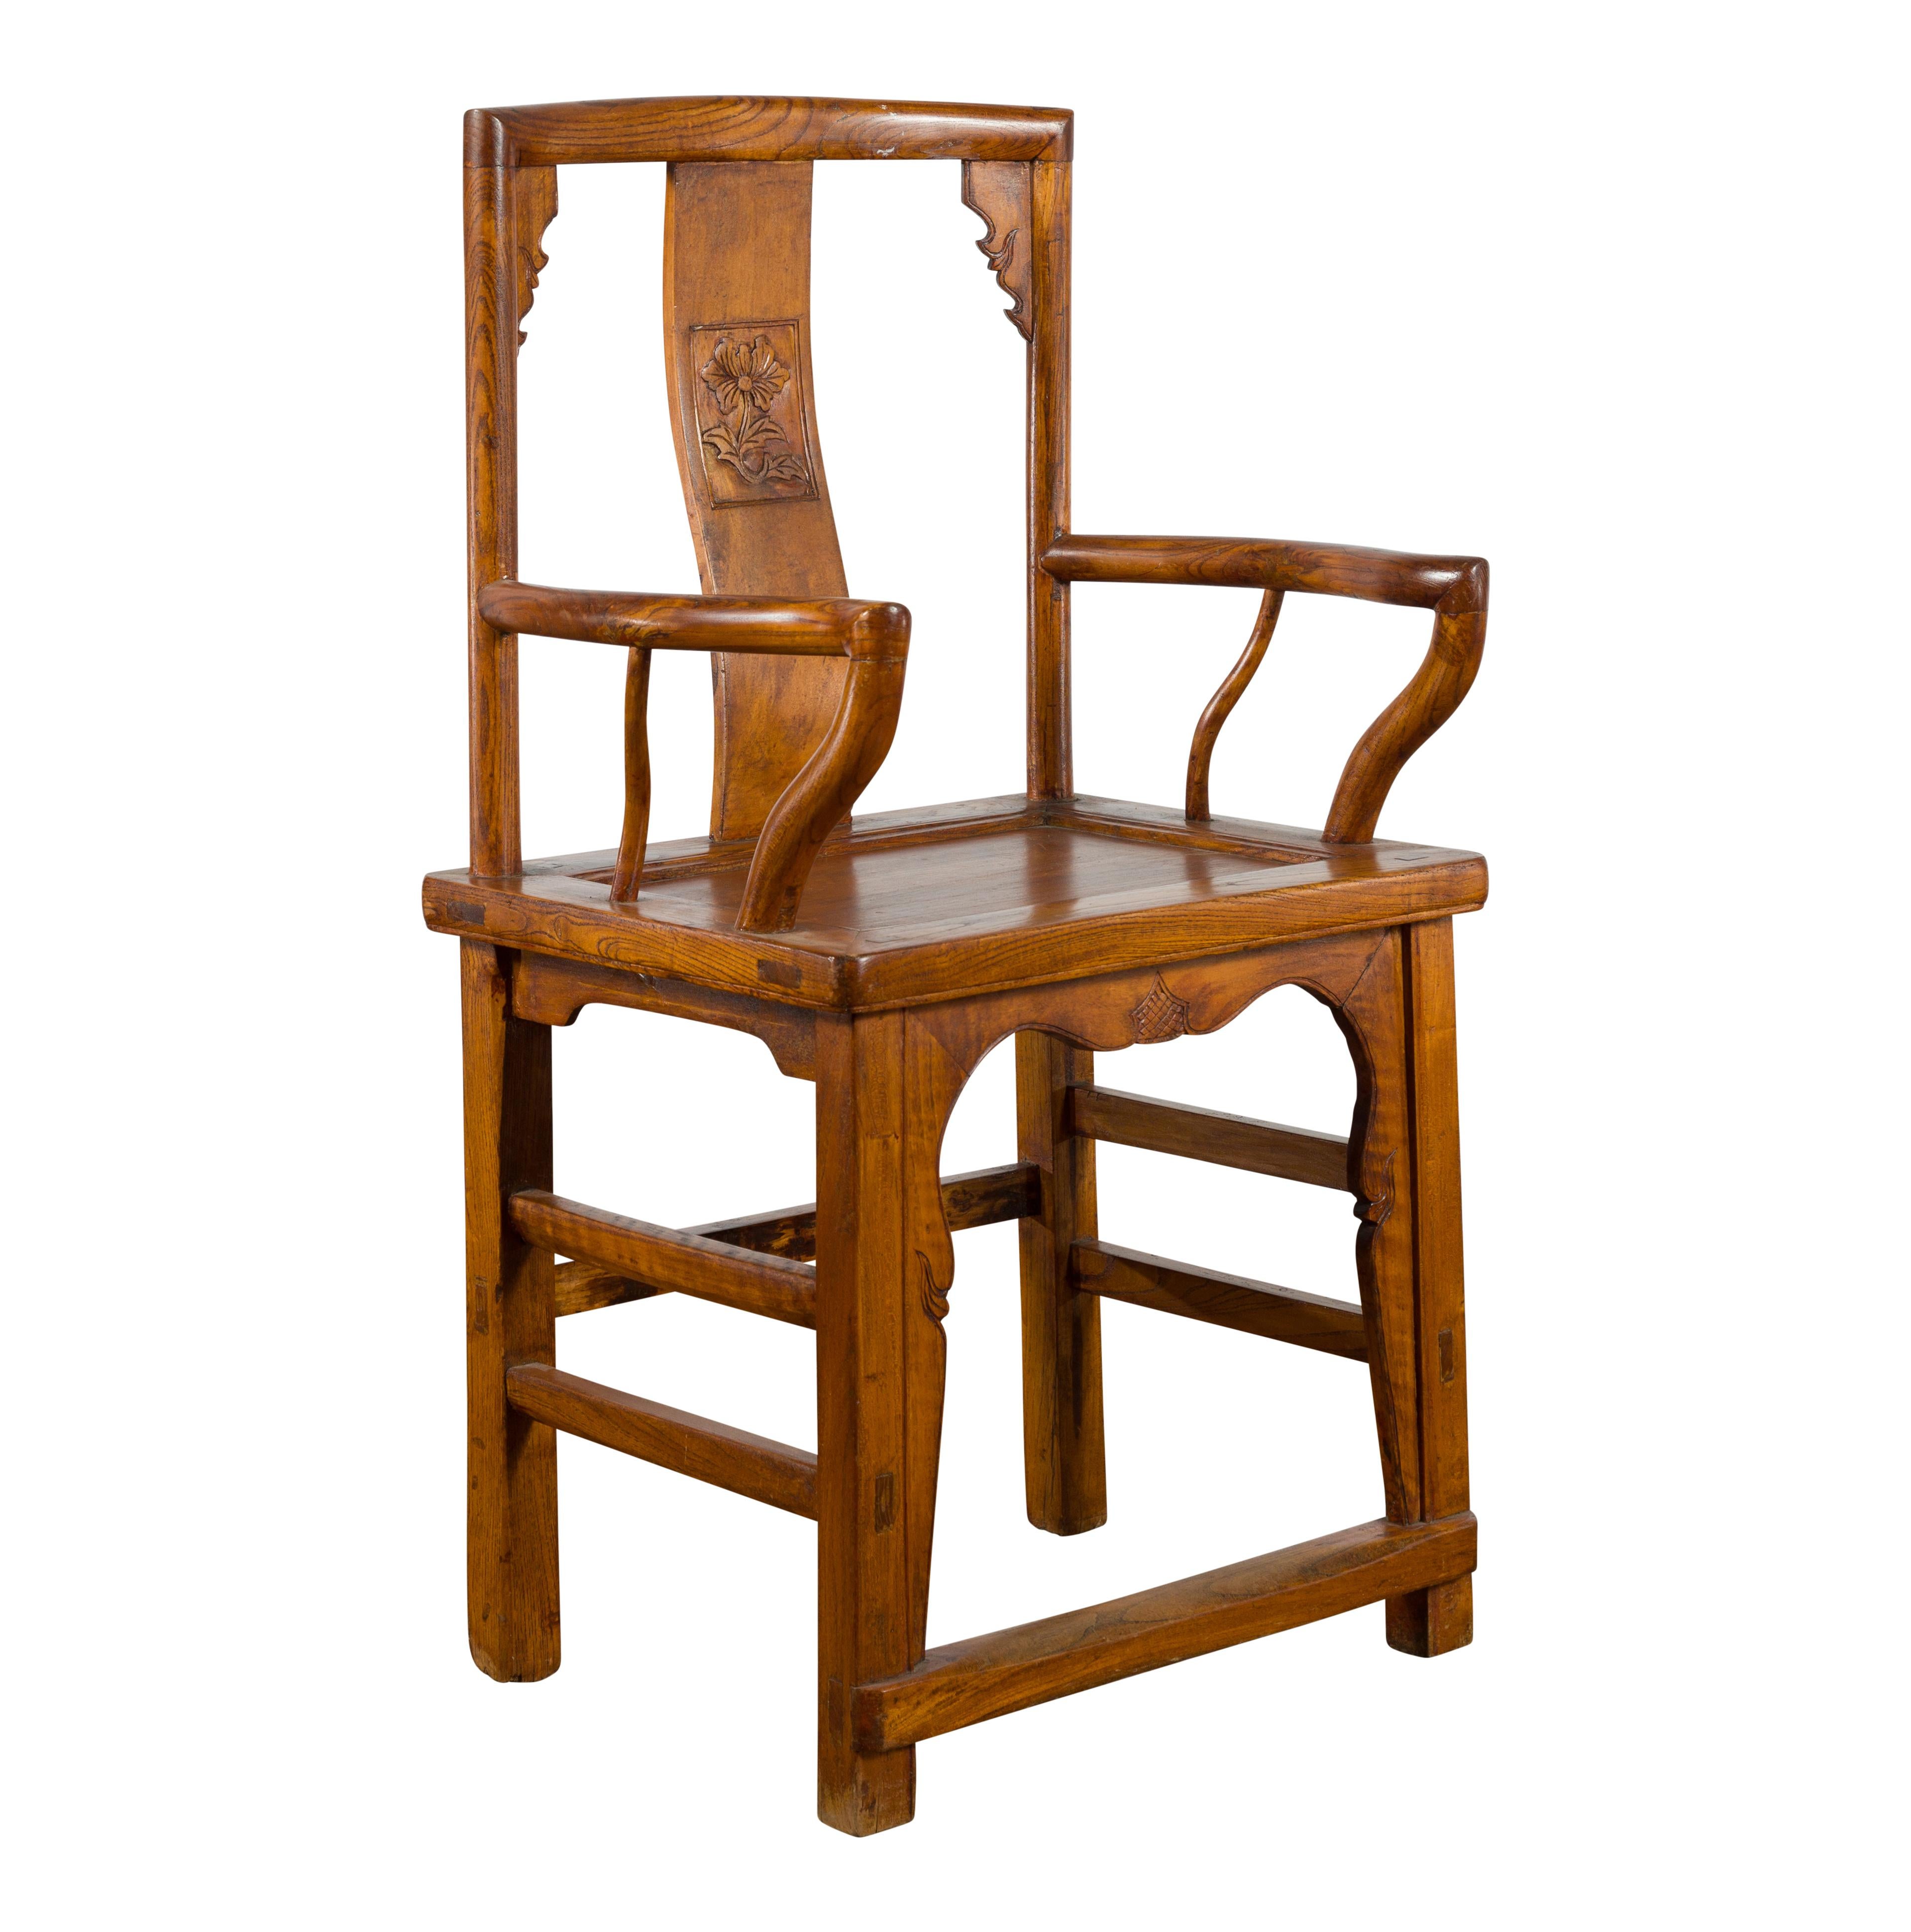 A Chinese Qing Dynasty period wooden armchair from the 19th century, with hand-carved motifs, serpentine open arms and straight legs with stretchers. Created in China during the Qing Dynasty, this chair features an open wooden back, adorned with a